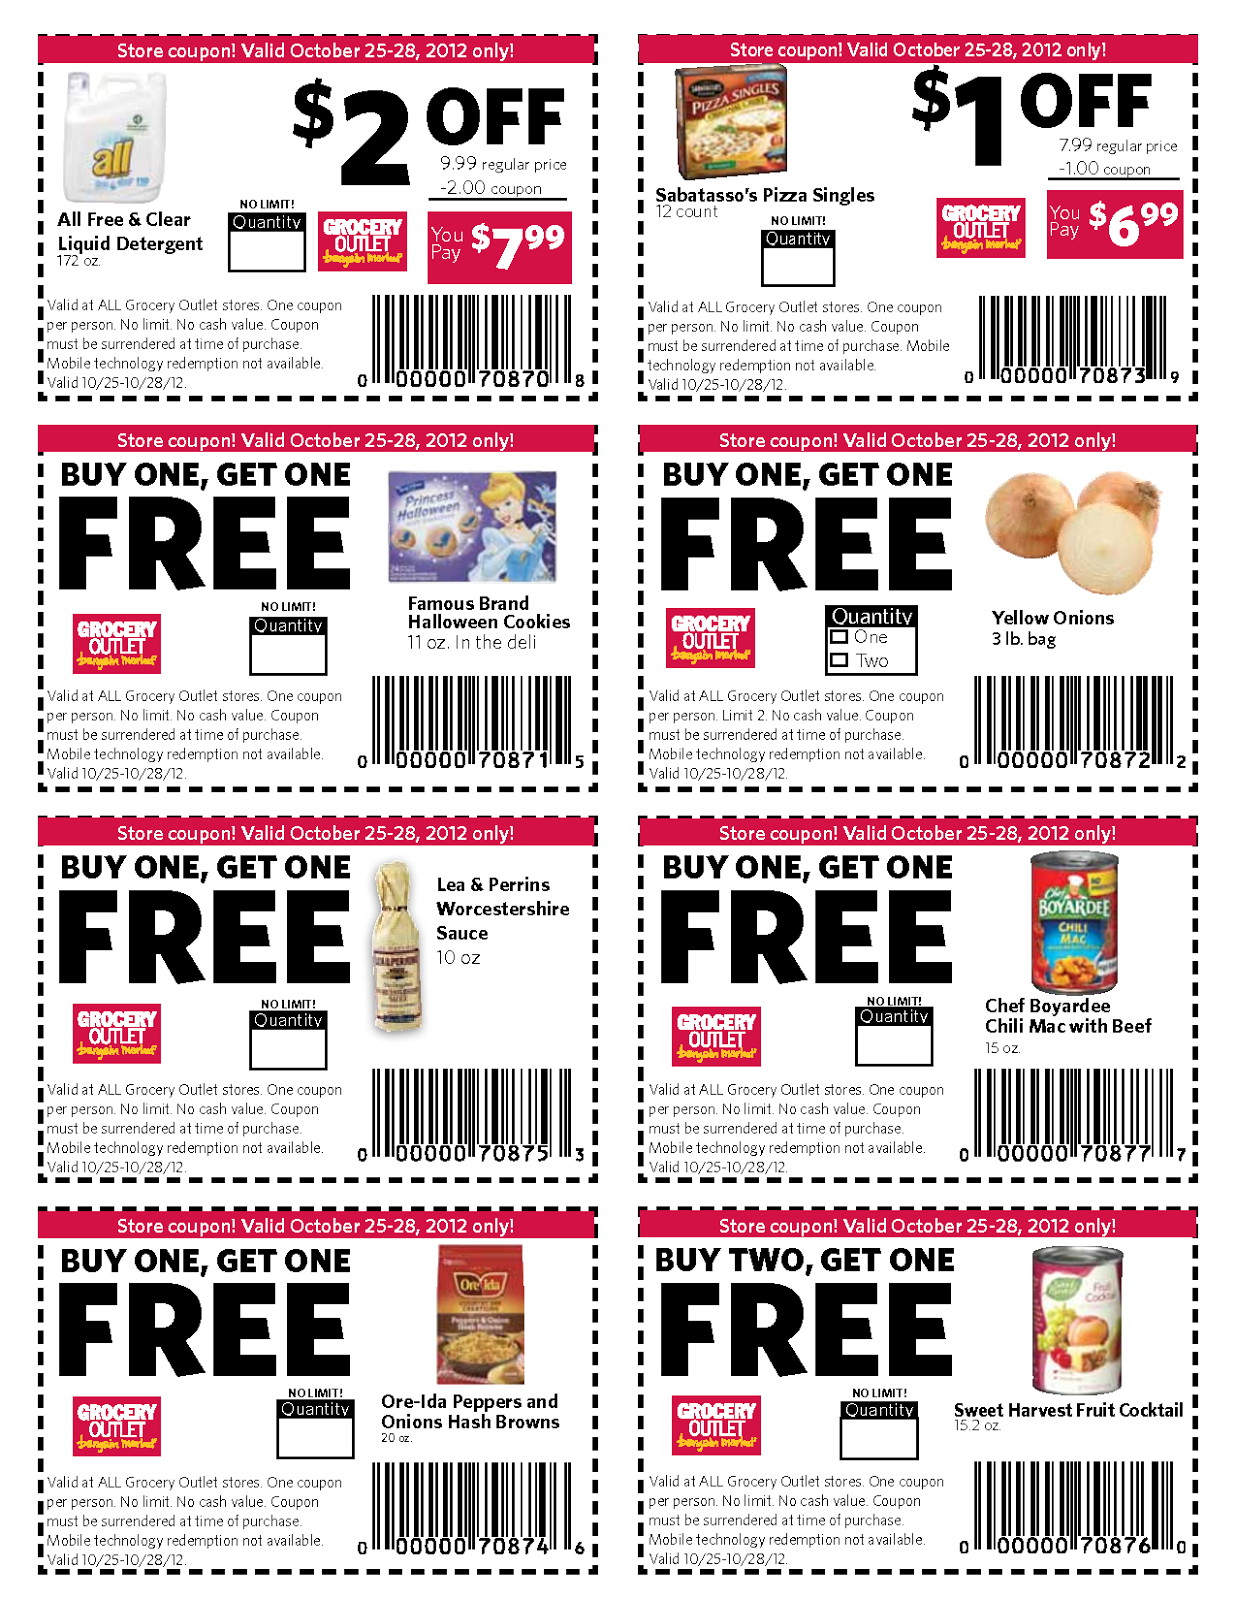 68 PRINTABLE COUPONS FOR FOOD IN UK IN PRINTABLE FOR FOOD 